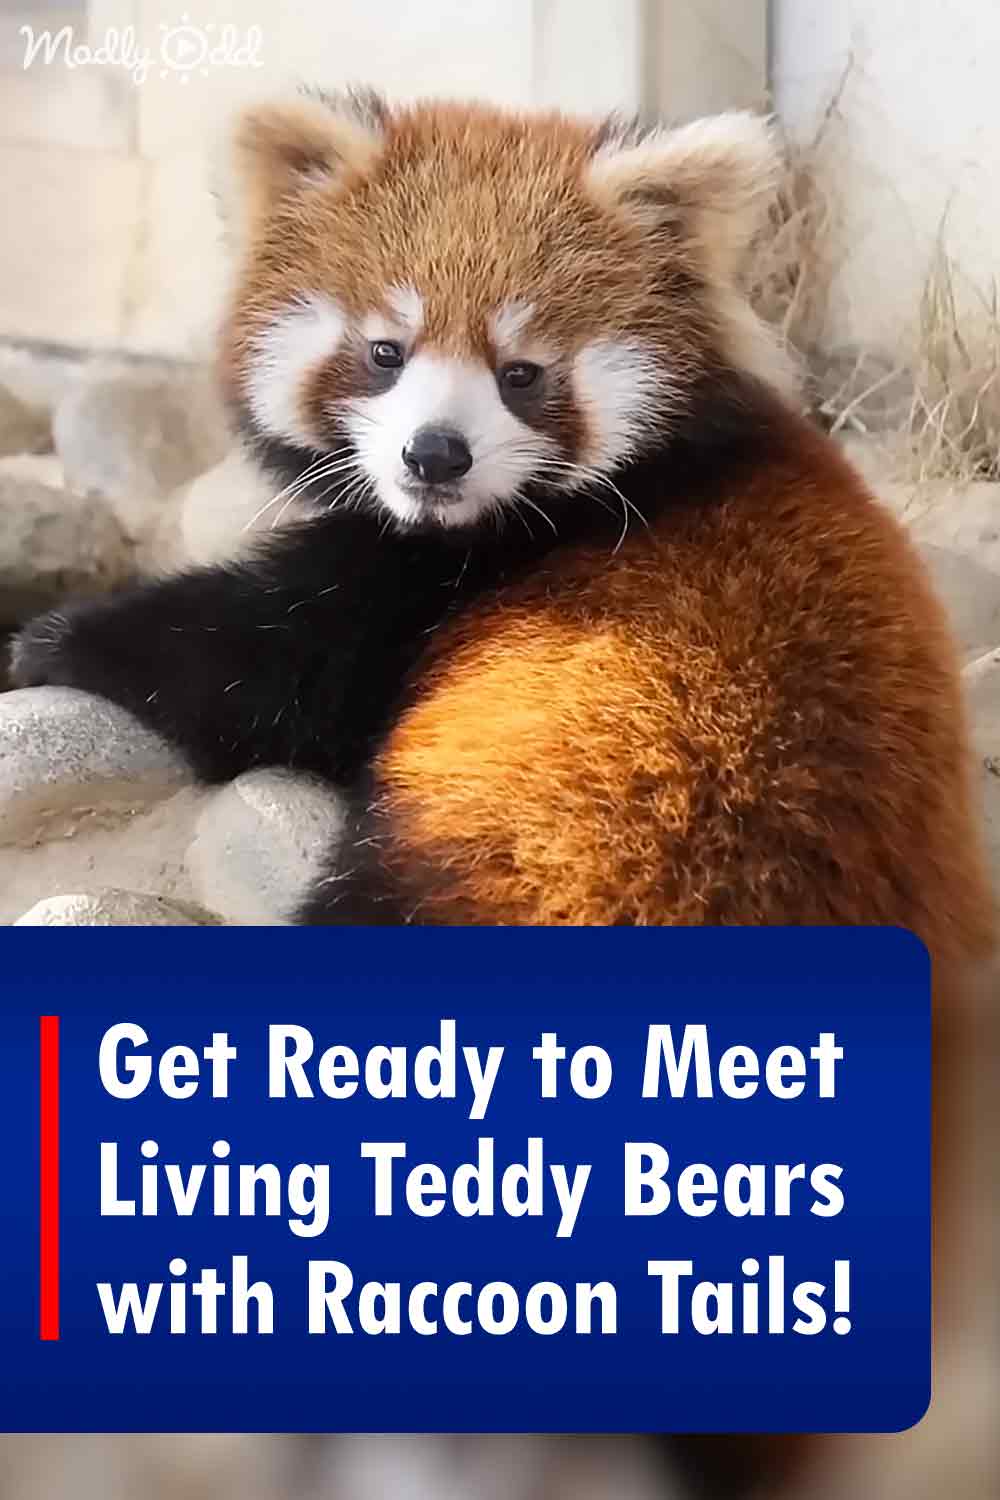 Get Ready to Meet Living Teddy Bears with Raccoon Tails!